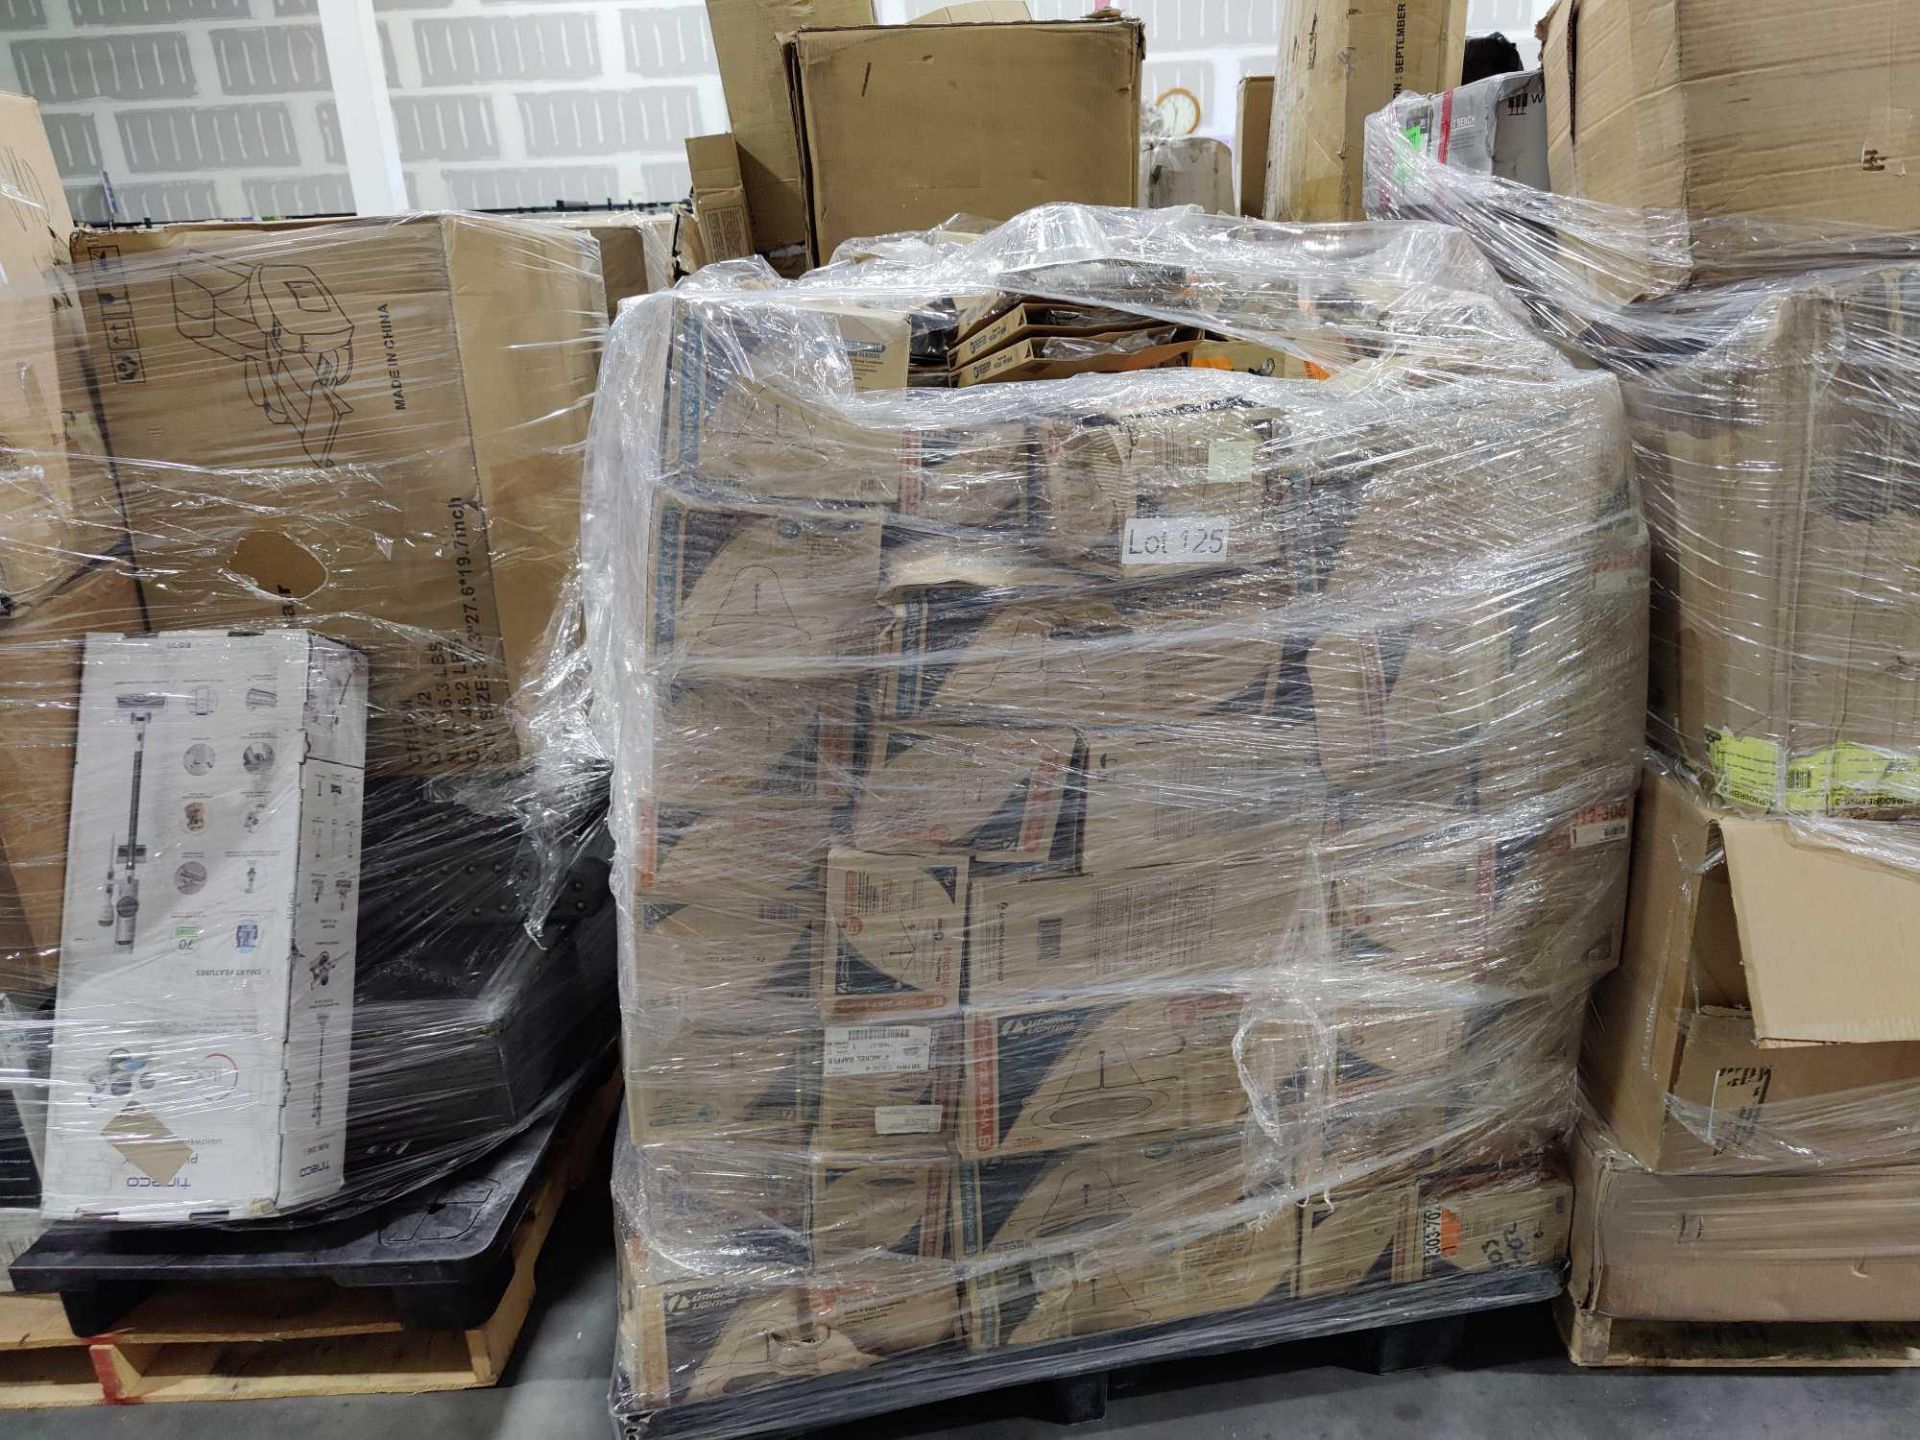 Pallet of Lithonia Lighting items